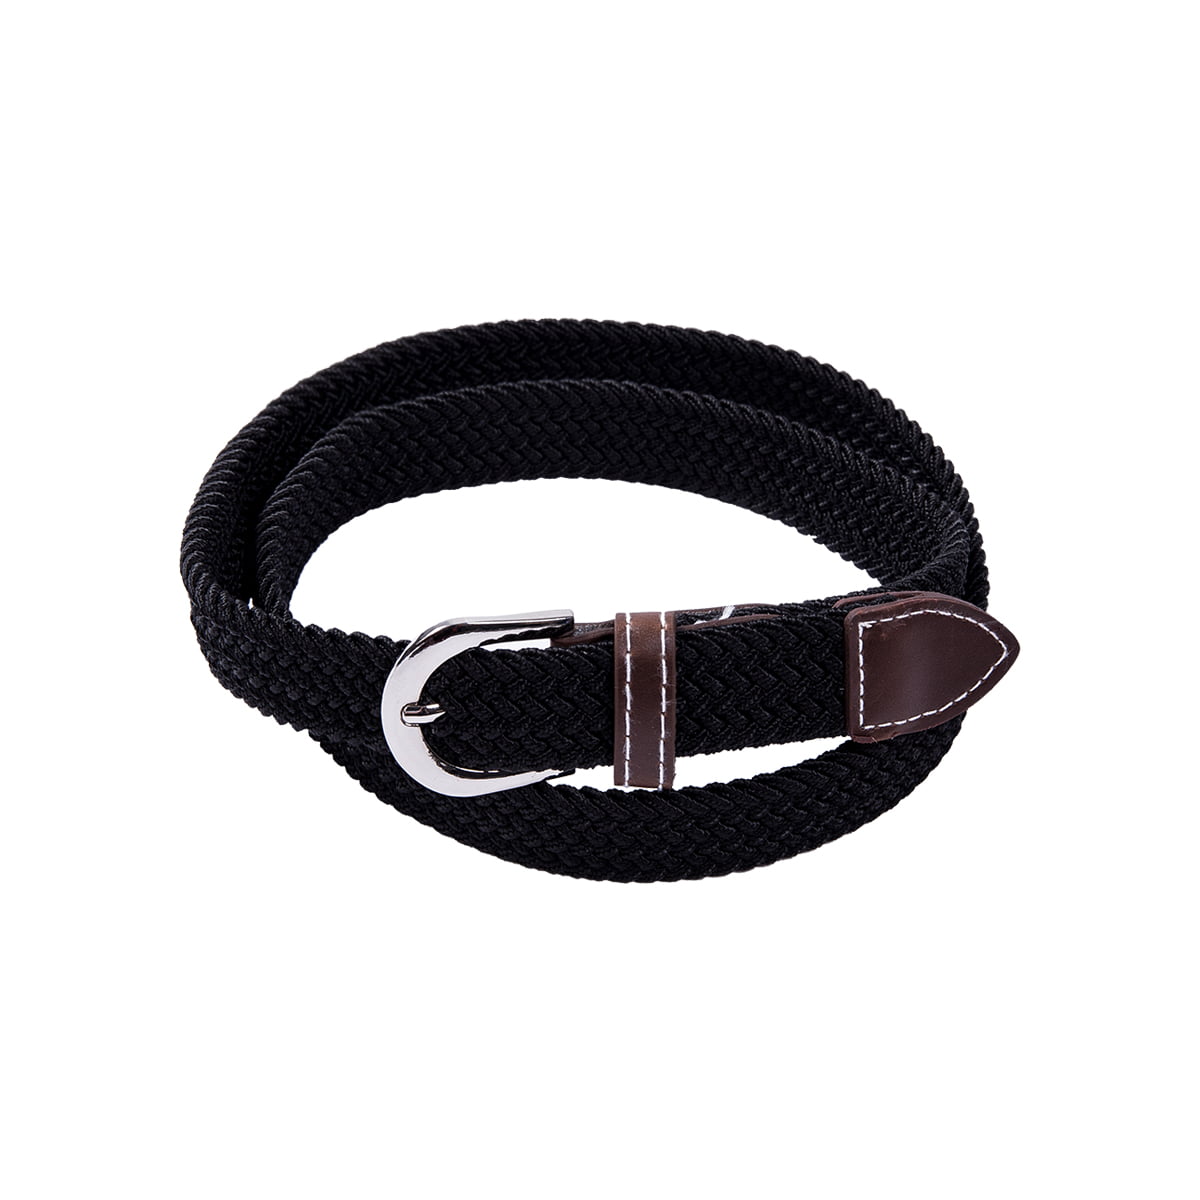 High-end Christmas gifts Fashion Men Elastic Stretch Woven Canvas Leather Pin Buckle Waist Belt khaki Blue 8 Colors 